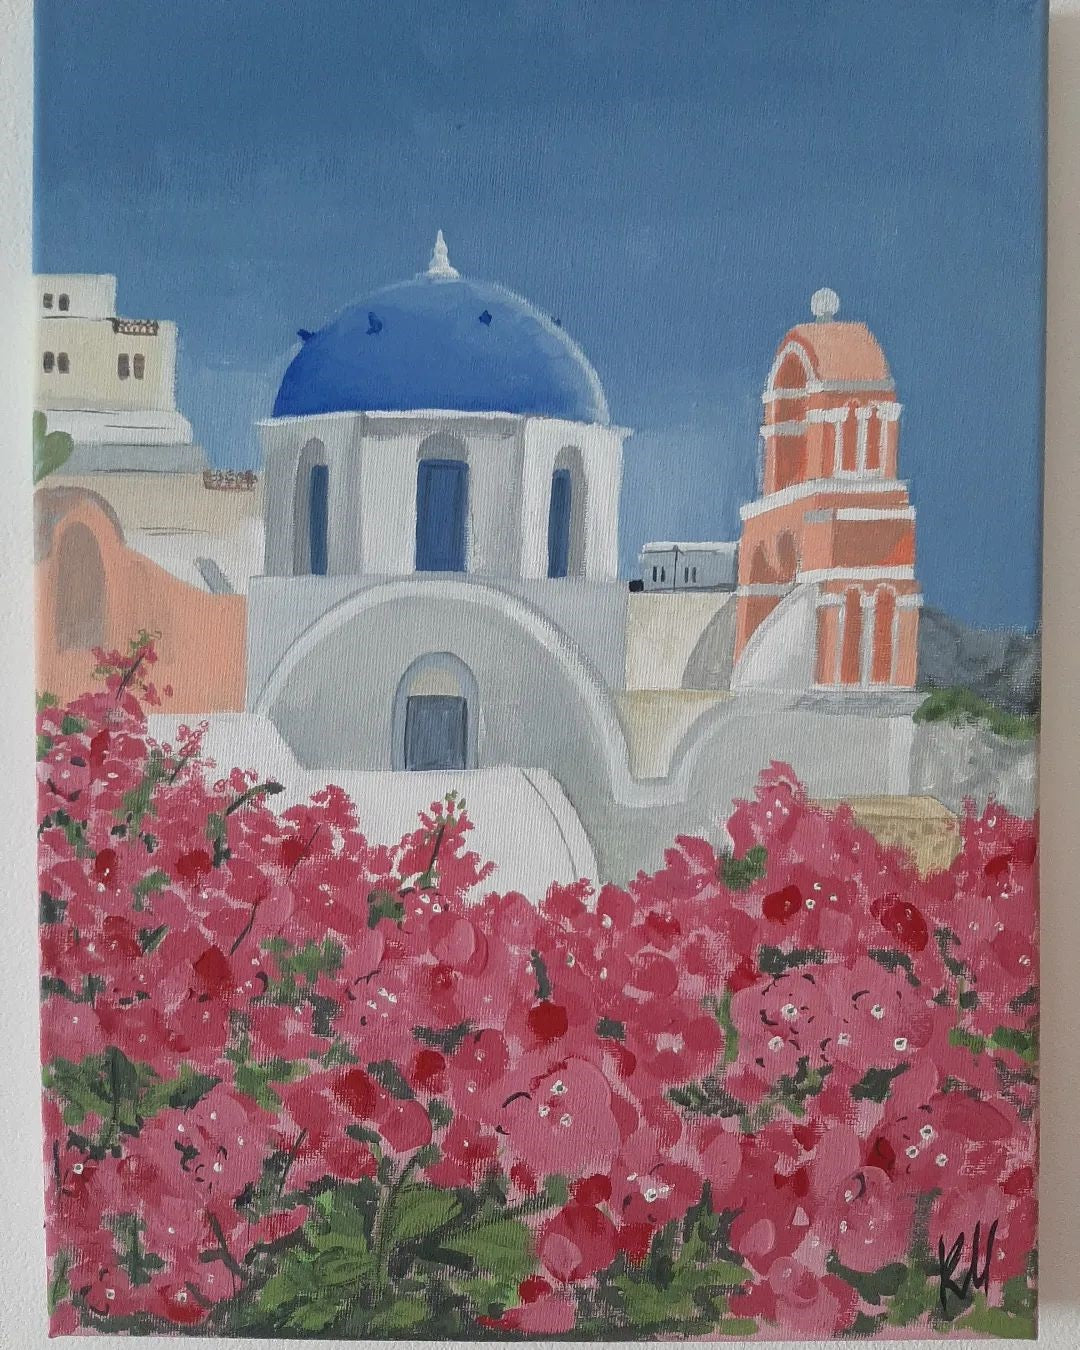 A painting of a building in Santorini with pink flowers painted in gouache.